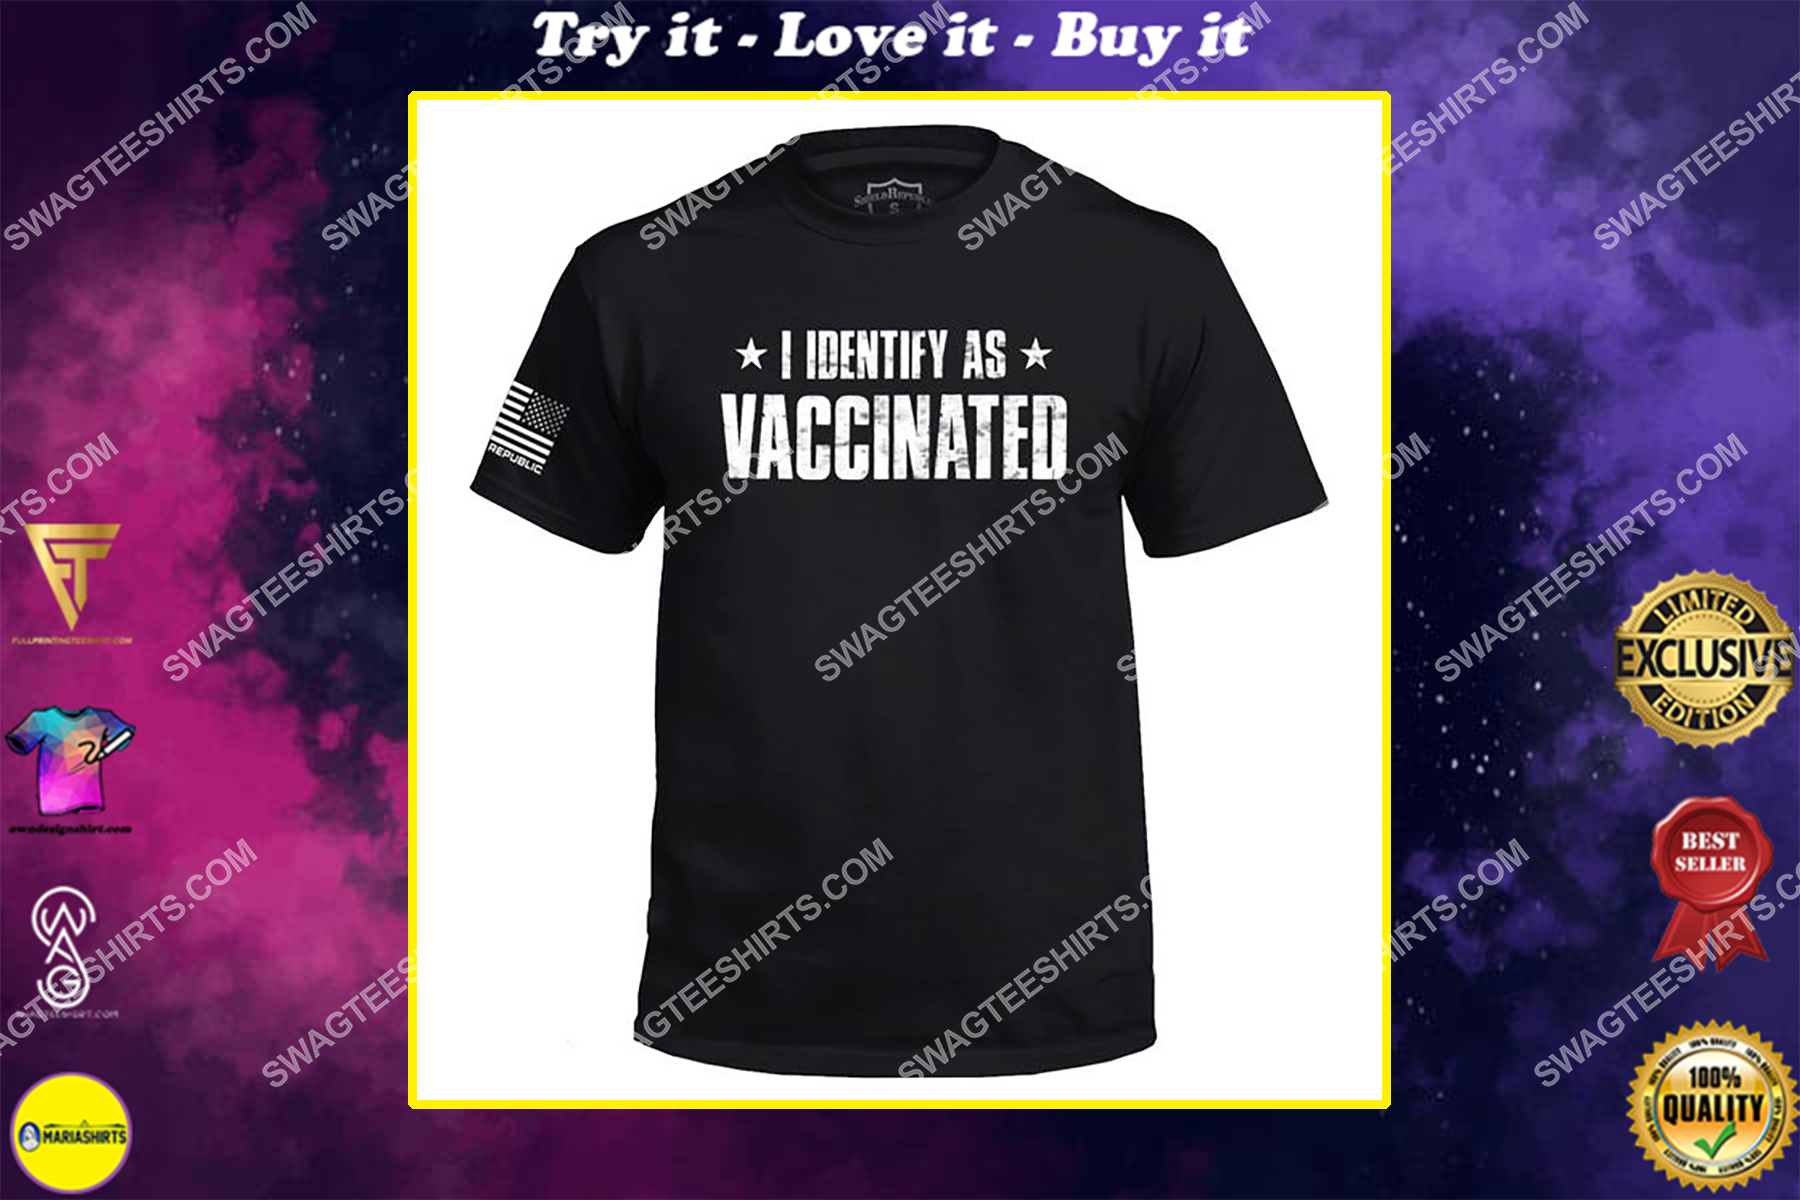 i identify as vaccinated full print shirt